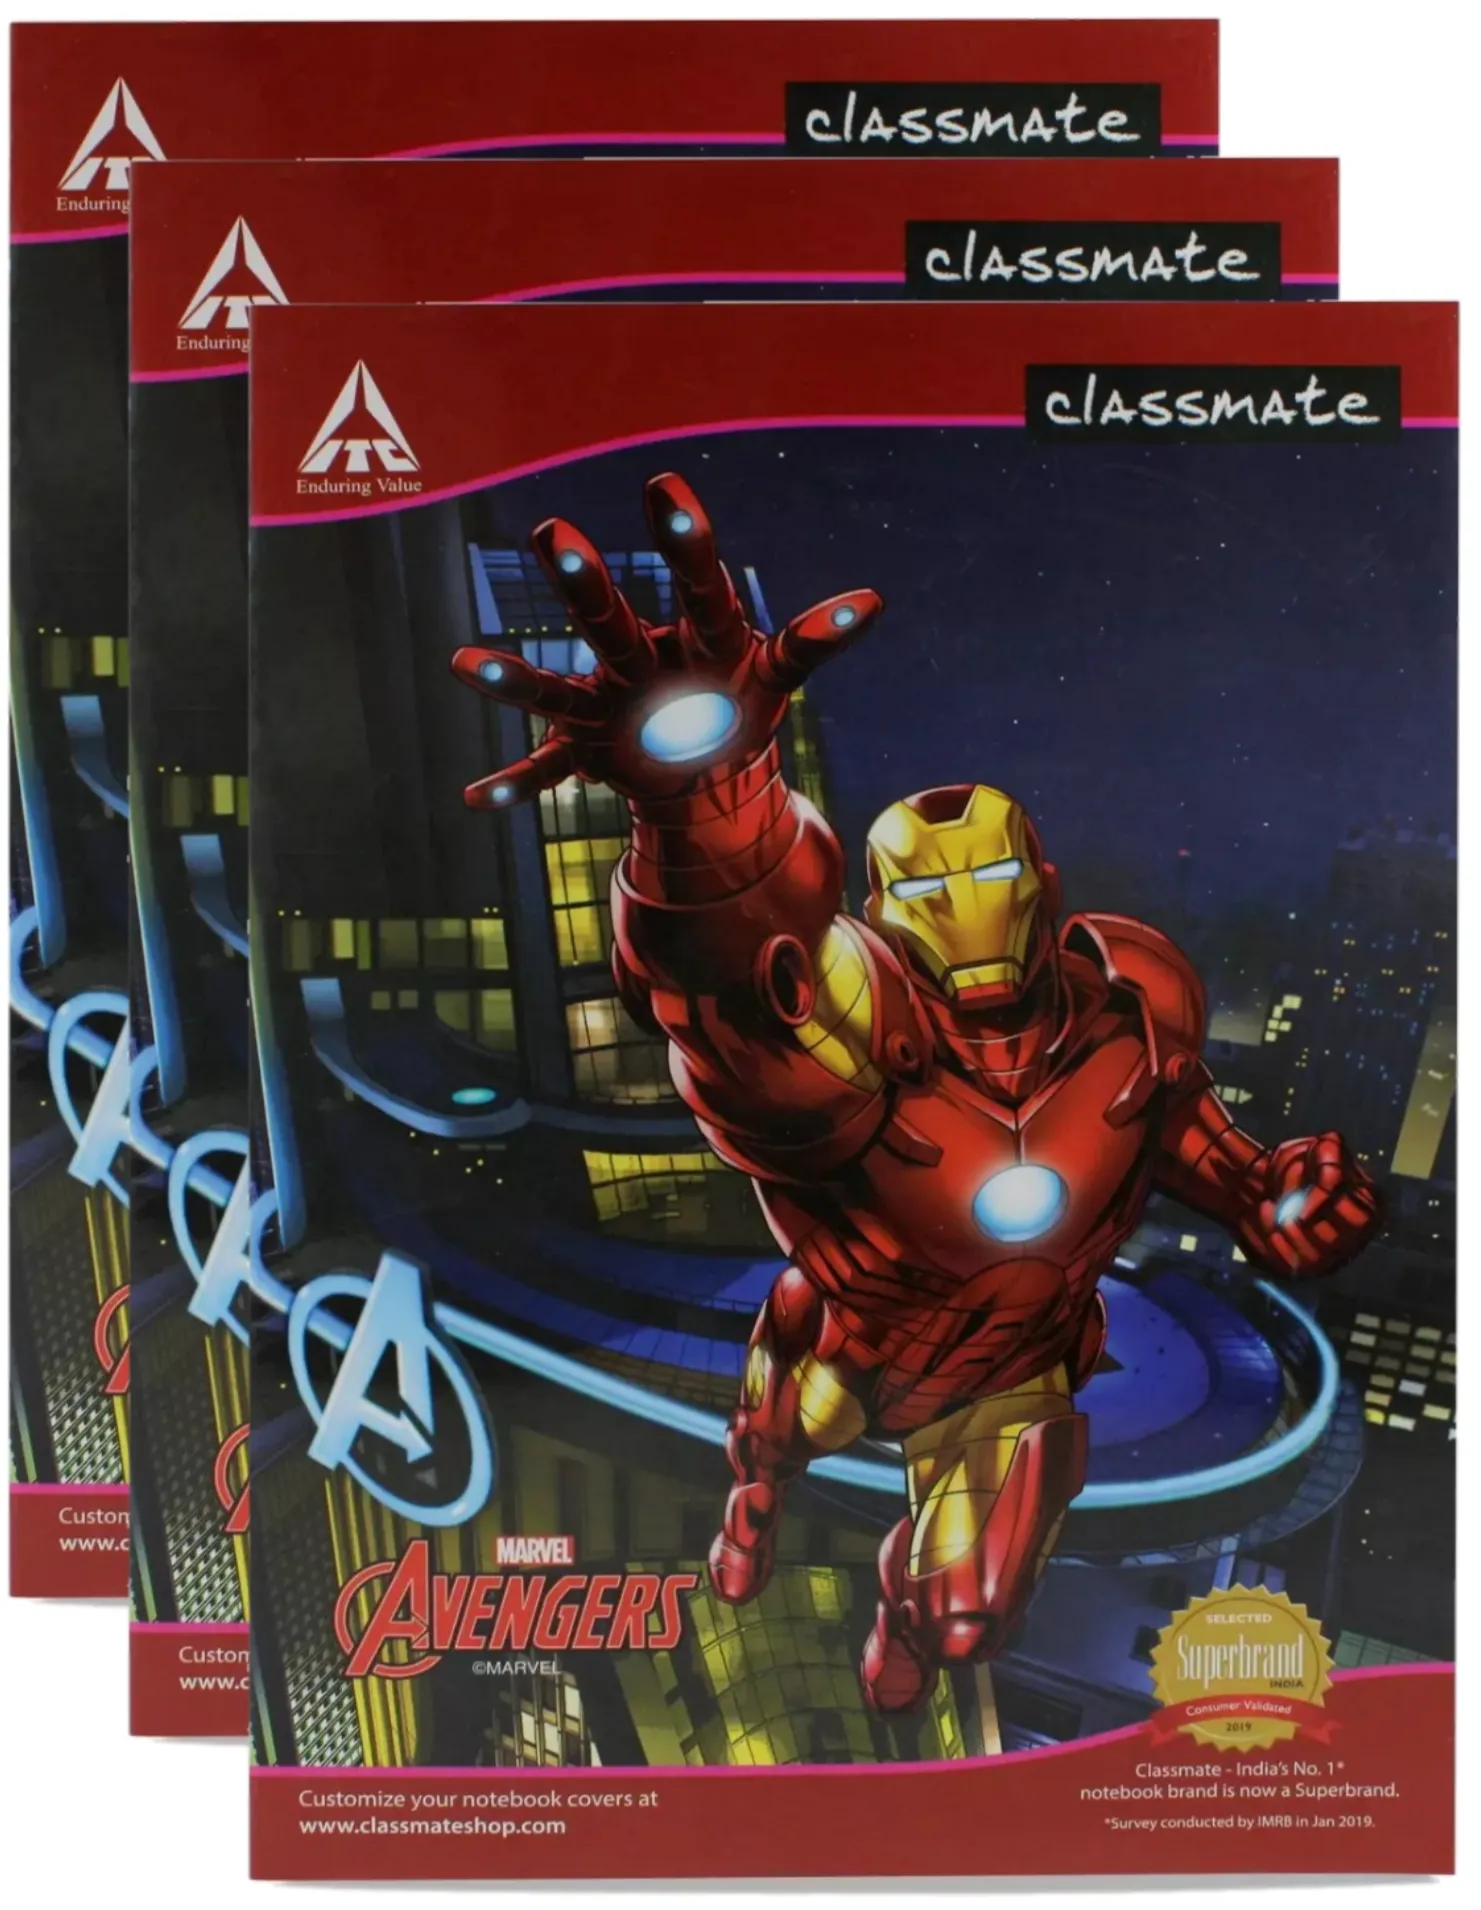 Classmate A4 Size Long Notebook Soft Cover 29.7X21 cm 108 Pages Pack of 3